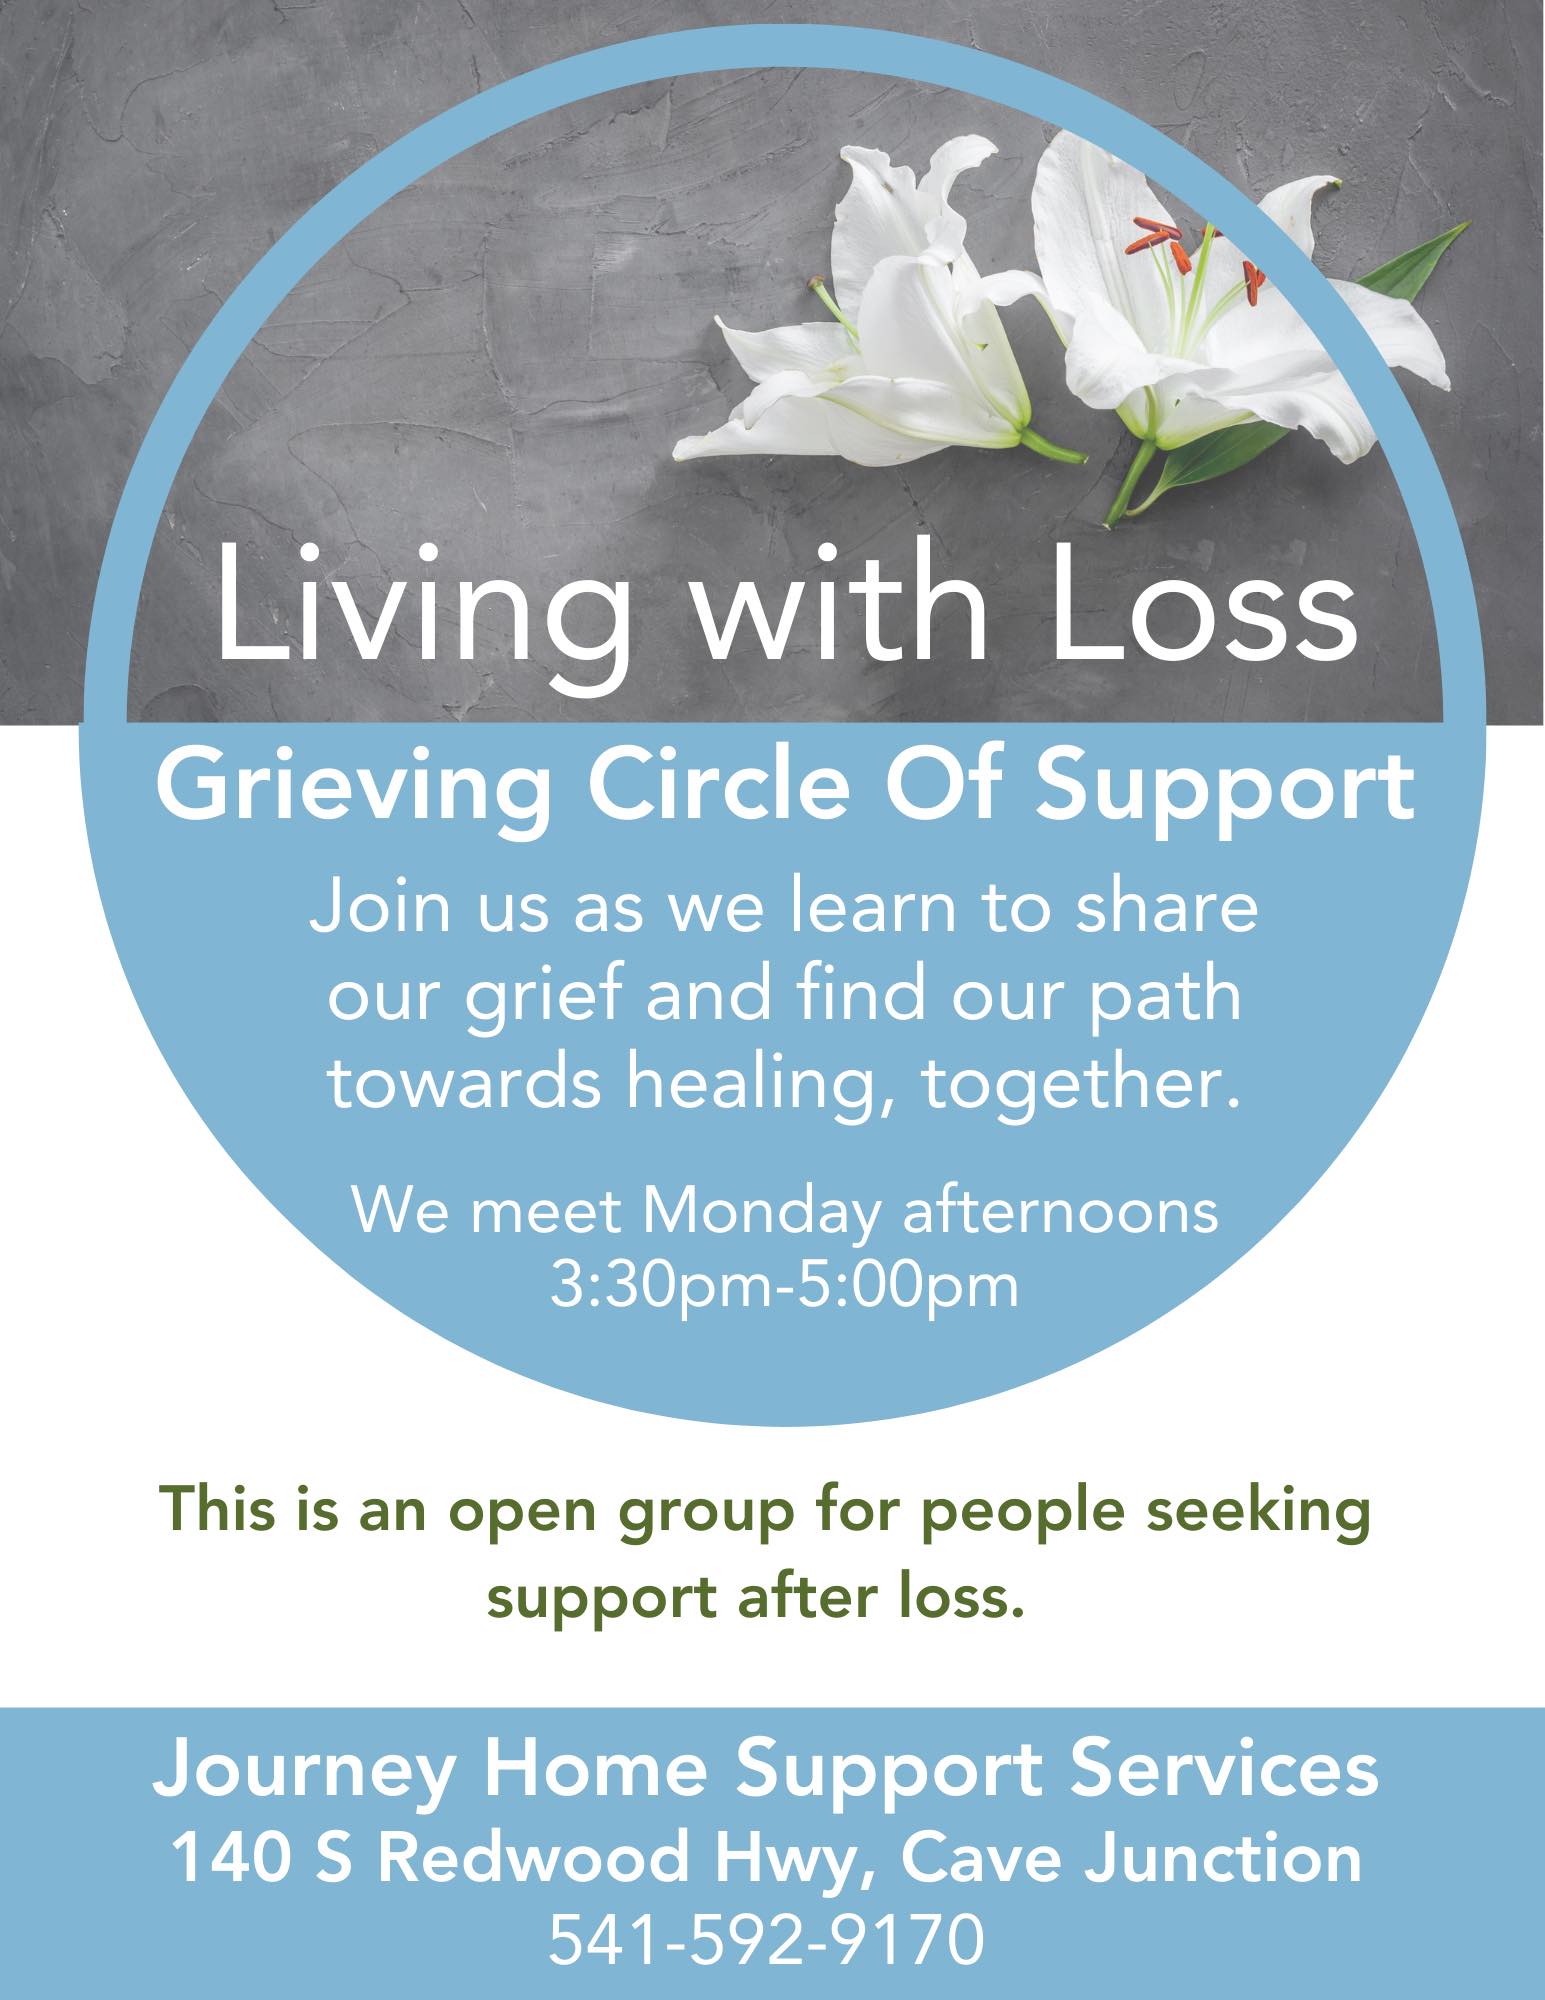 Living with Loss - Grieving Circle of Support